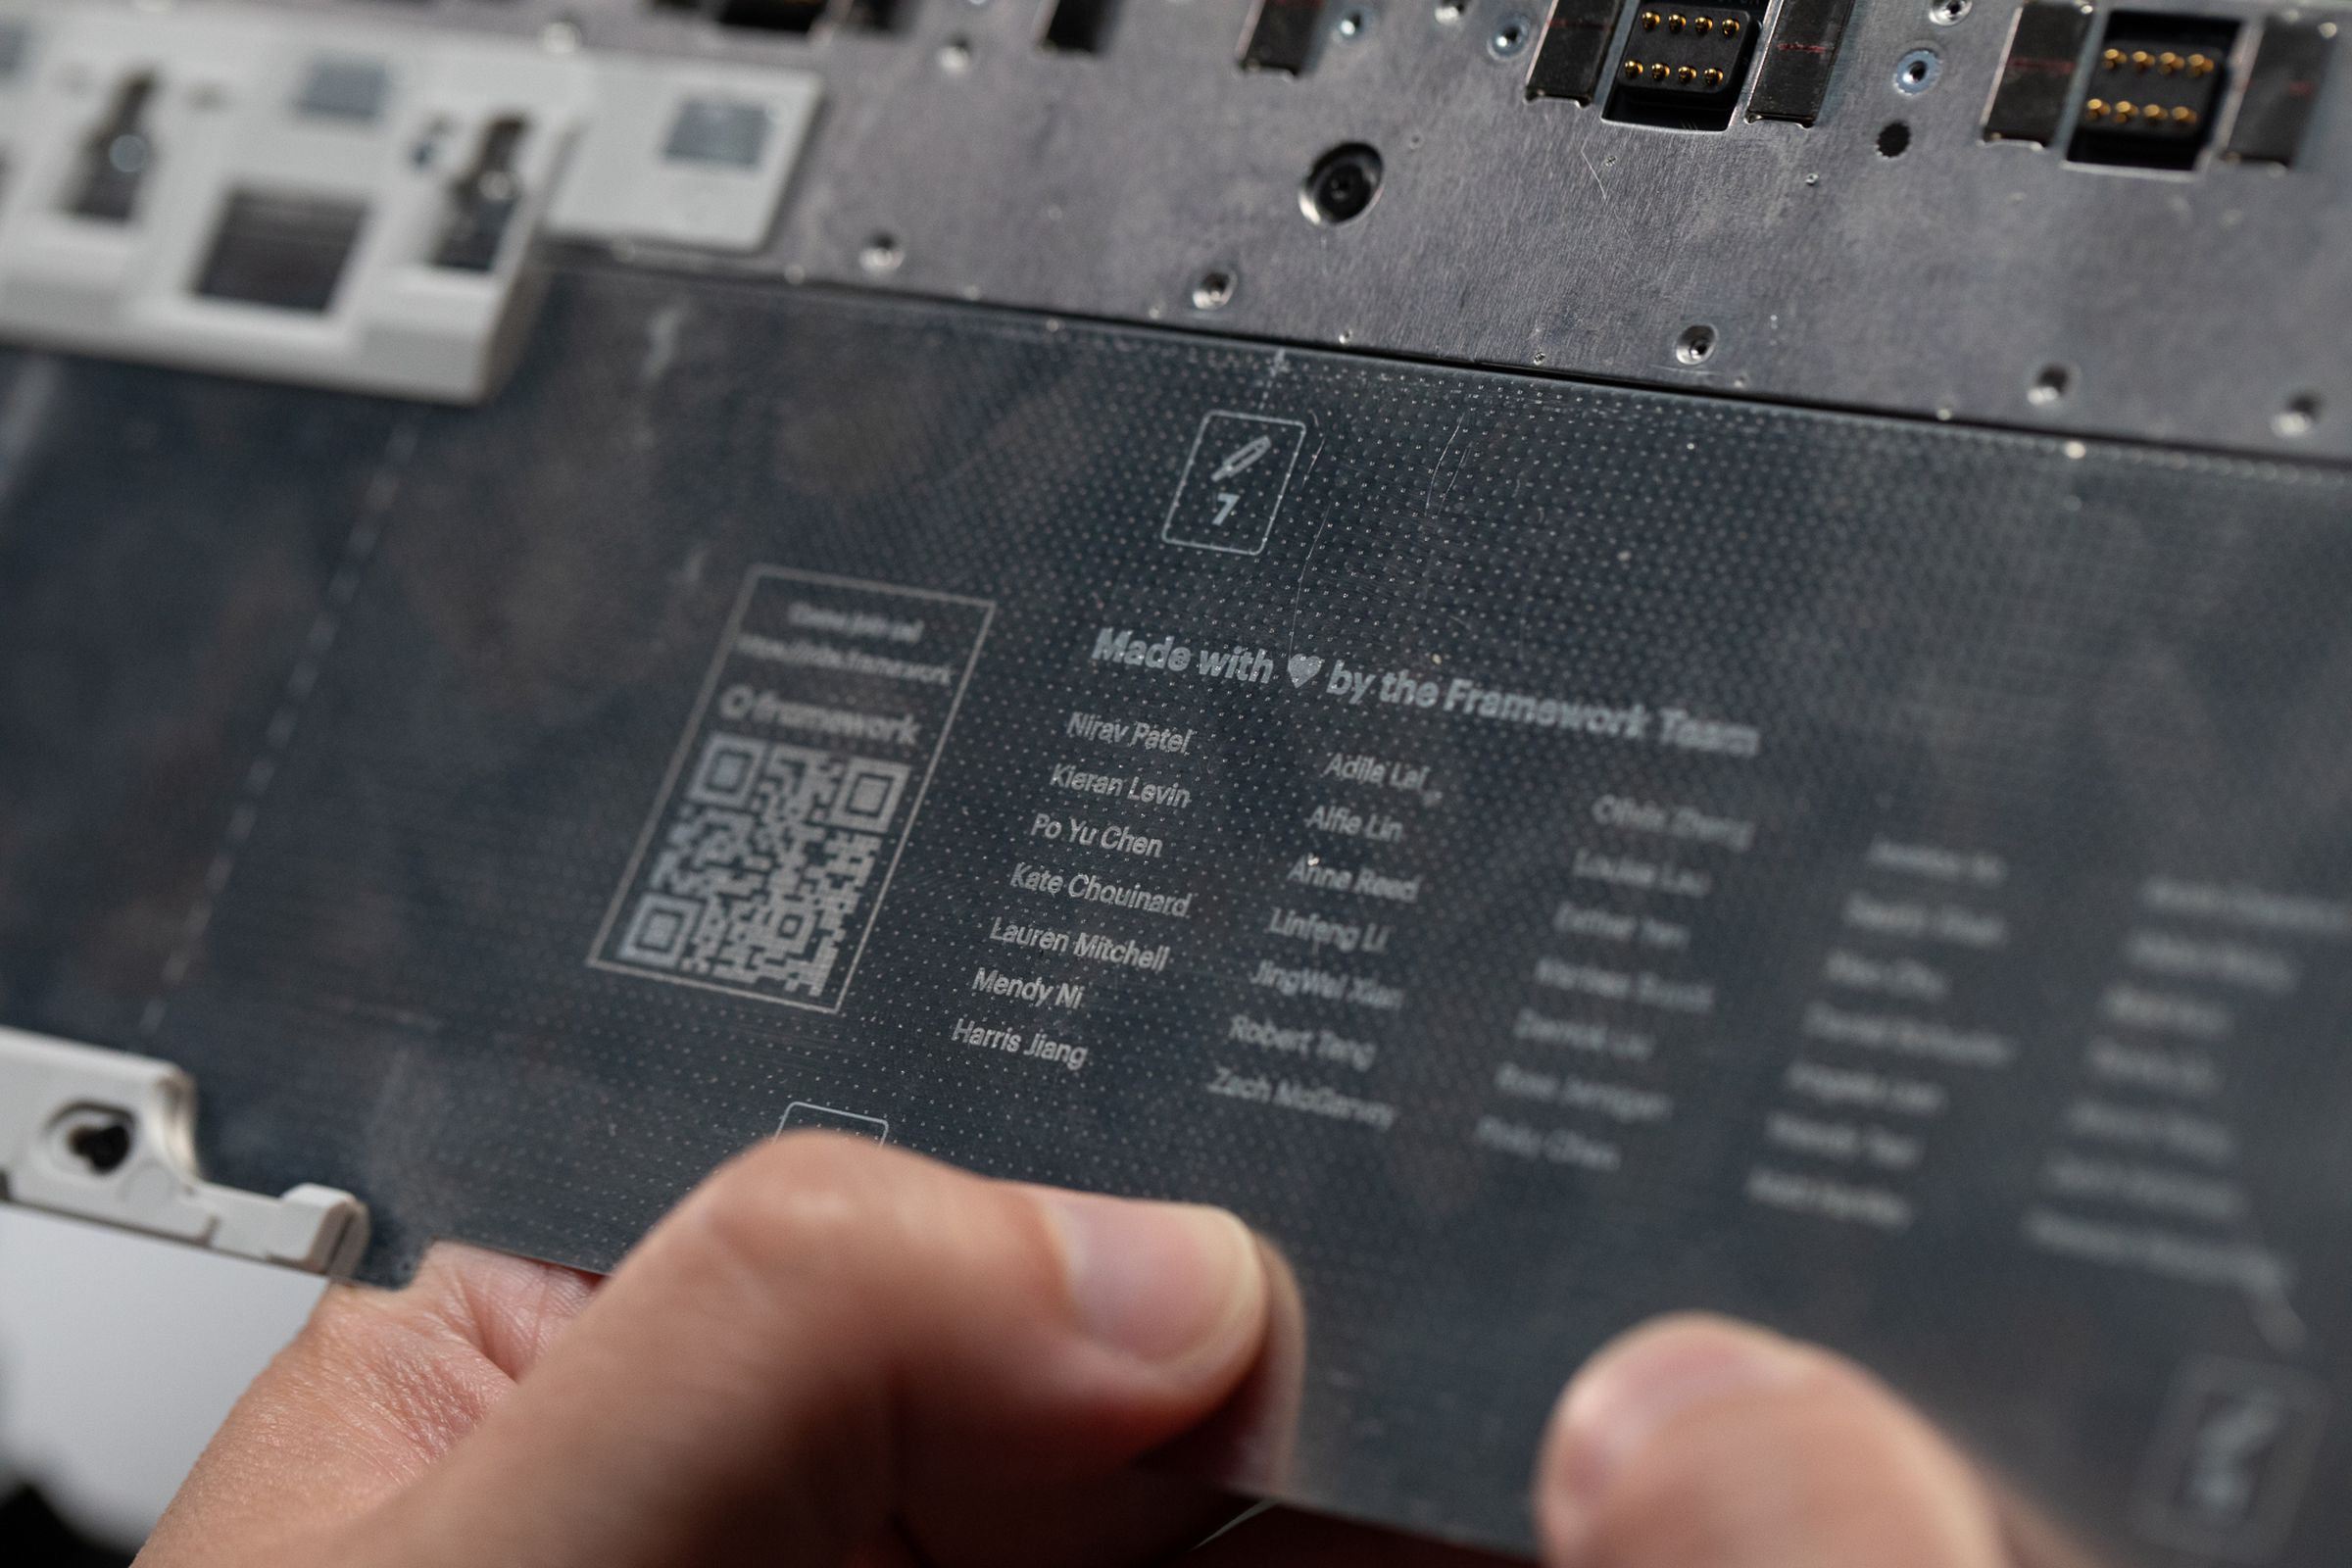 The Framework Laptop 16’s midboard is “signed” by members of the team.